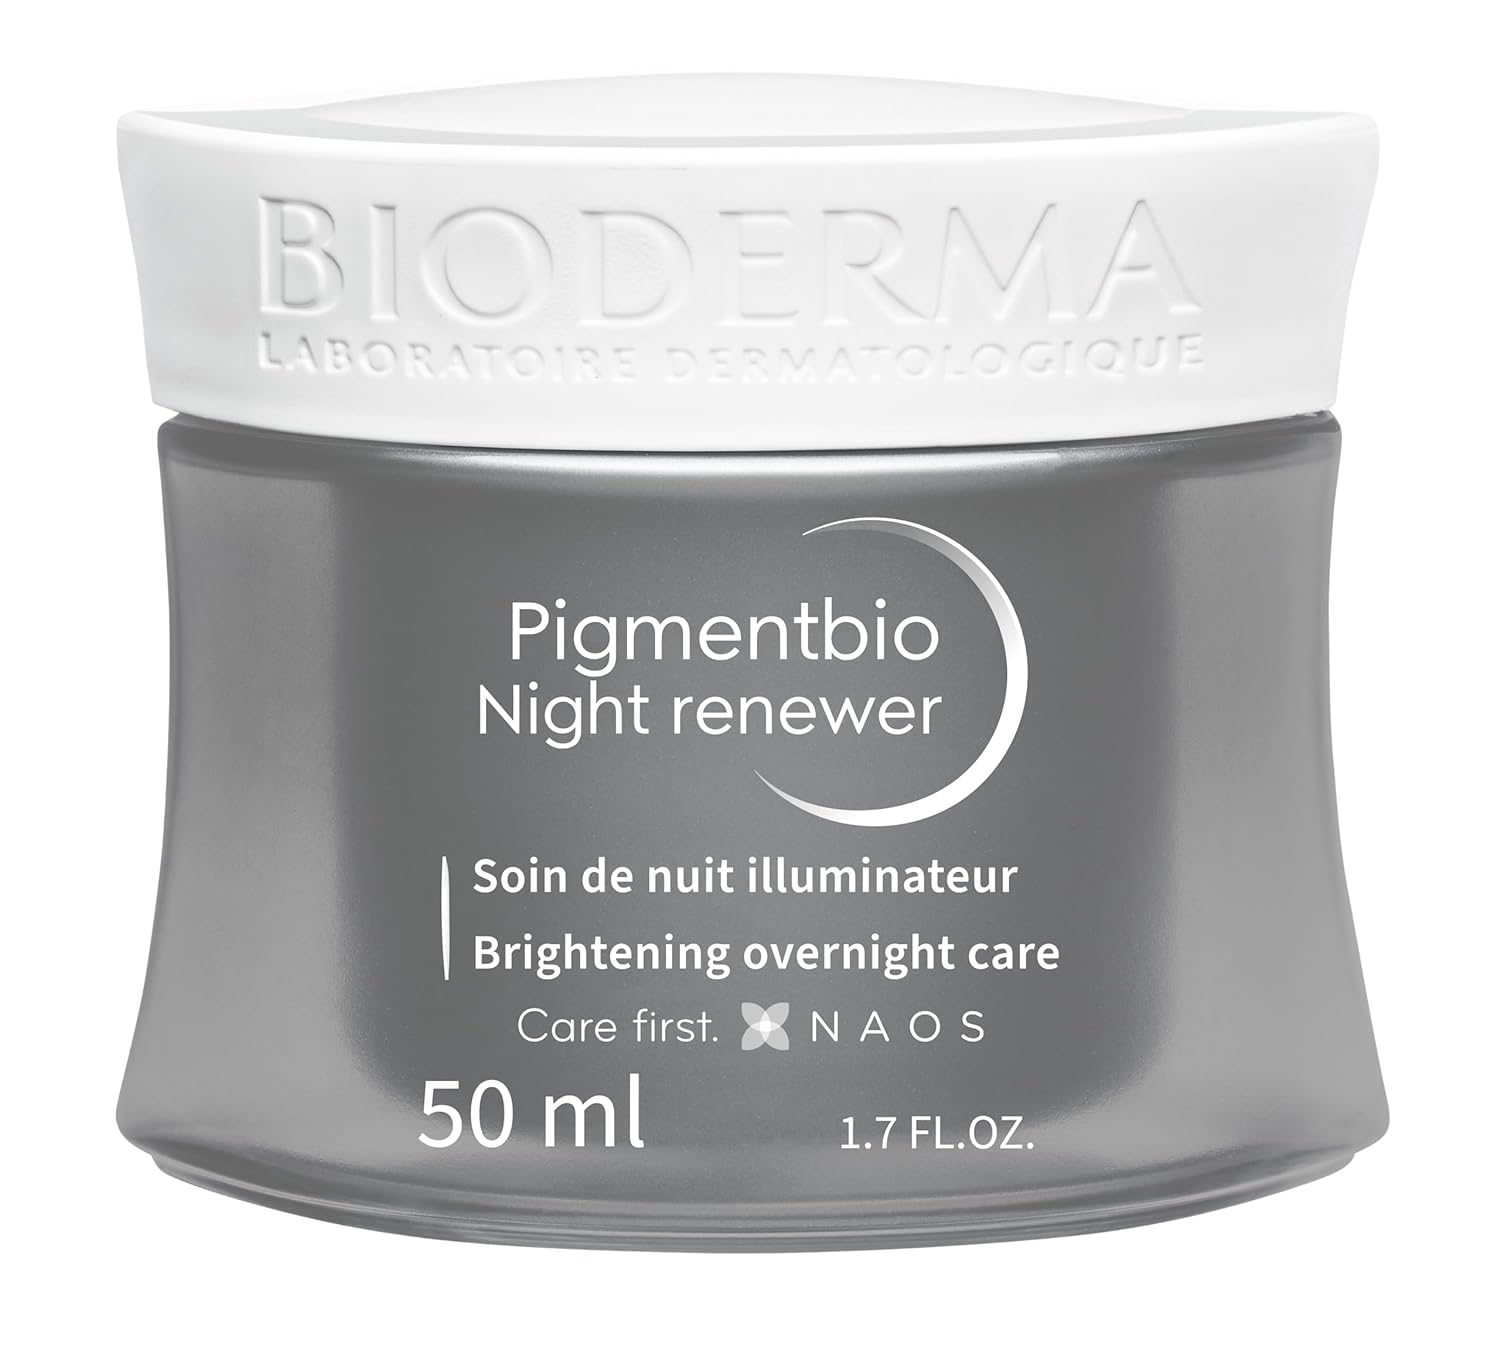 Bioderma Pigmentbio Night Renewer - Face Lotion Night Cream - Firms and Smoothes Skin - Night Moisturizer for Hyperpigmented Skin to Visible Dark Spots